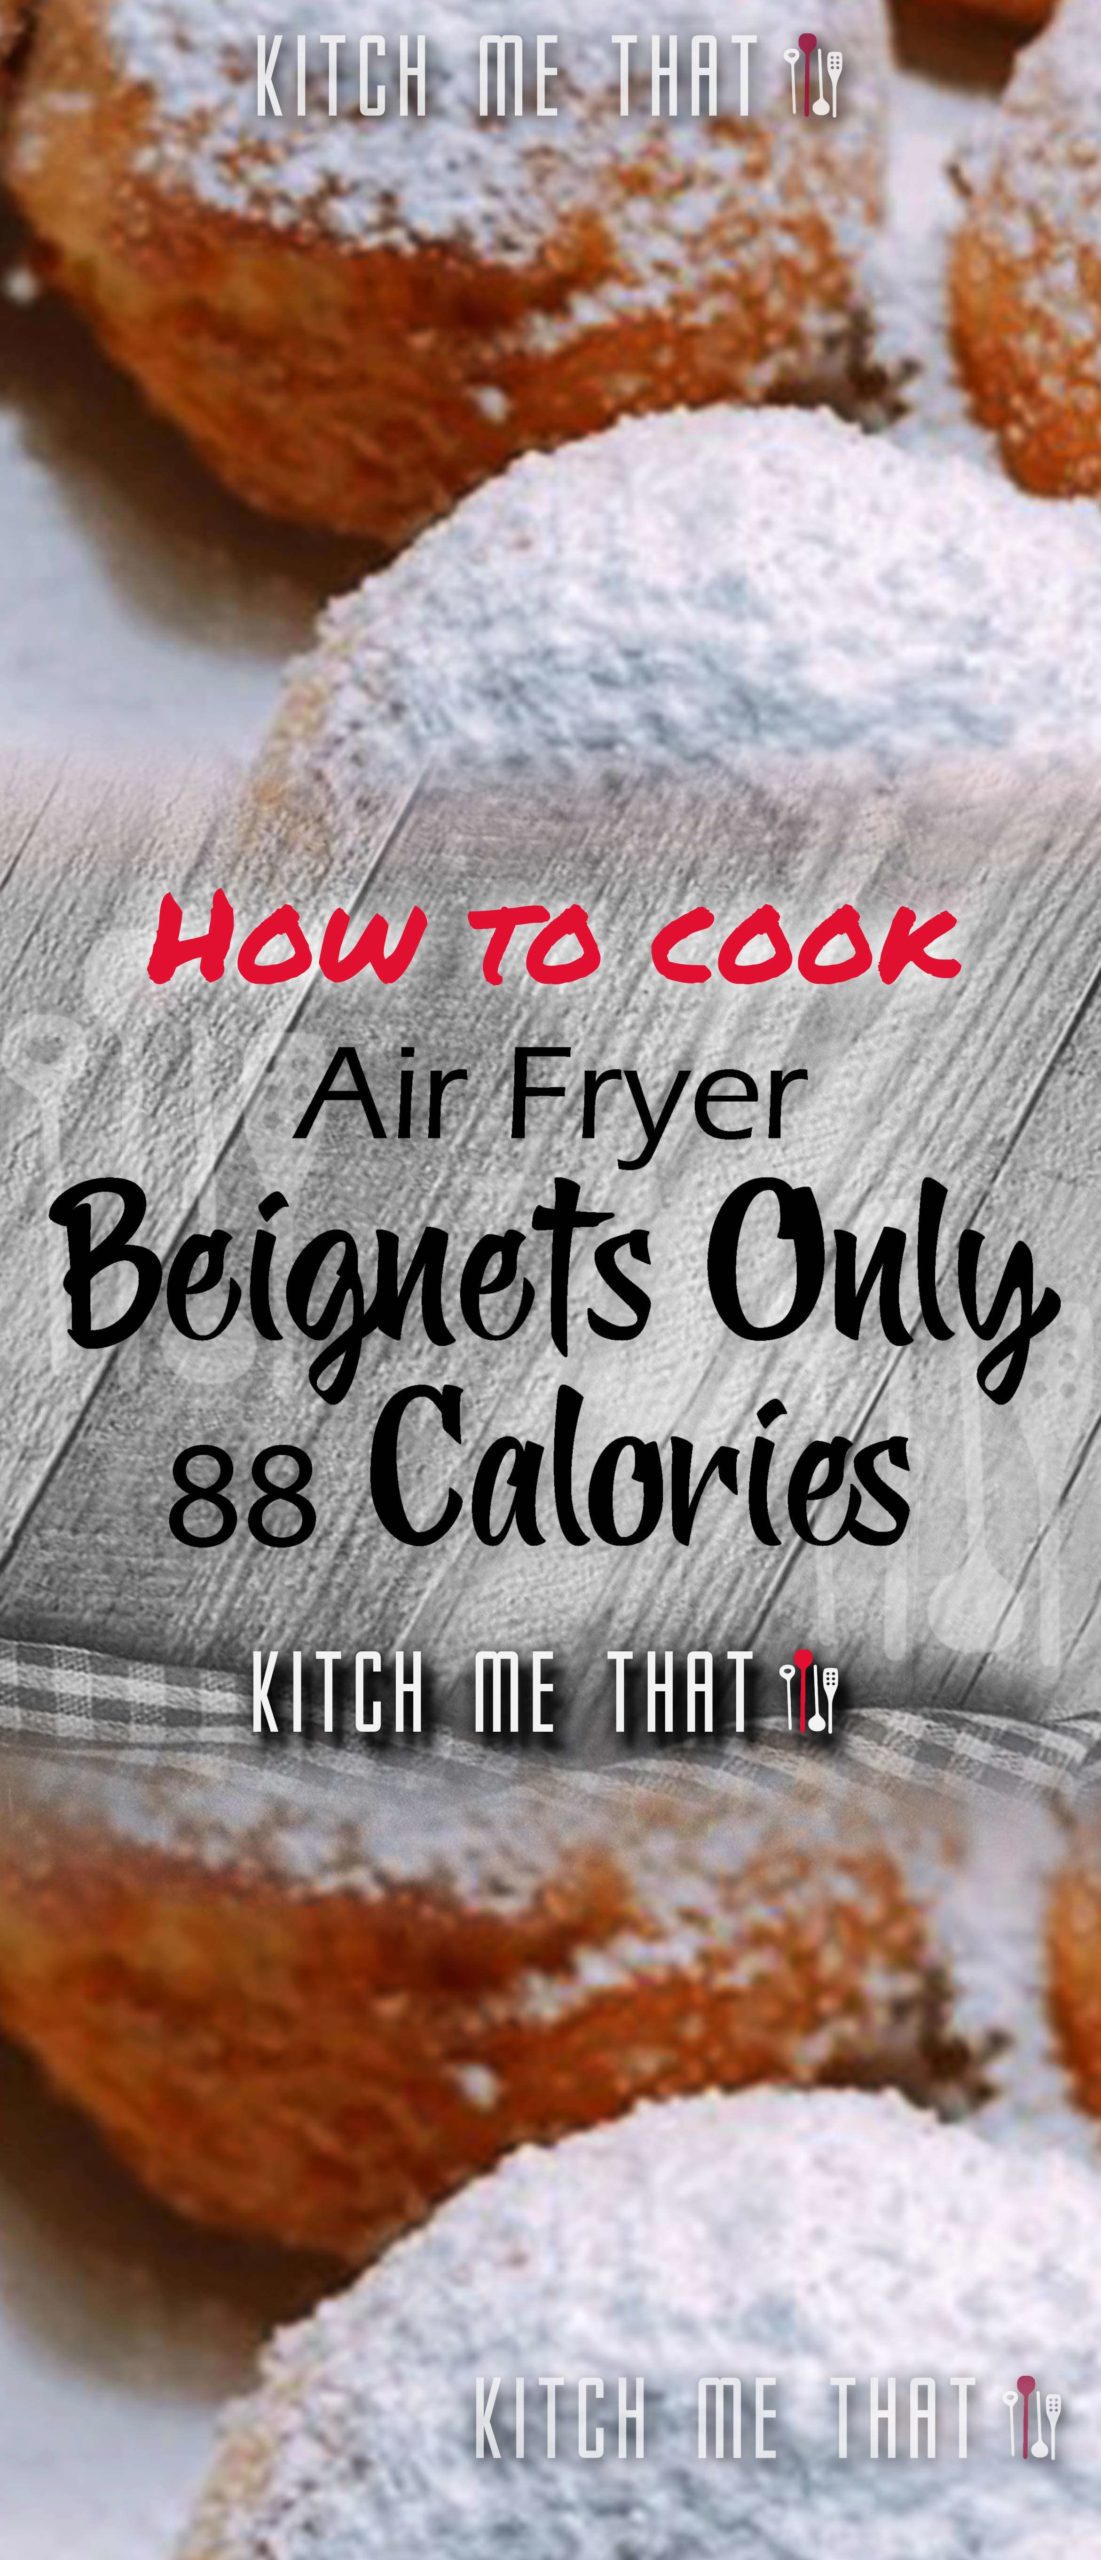 Air Fryer Beignets Only Have 88 Calories